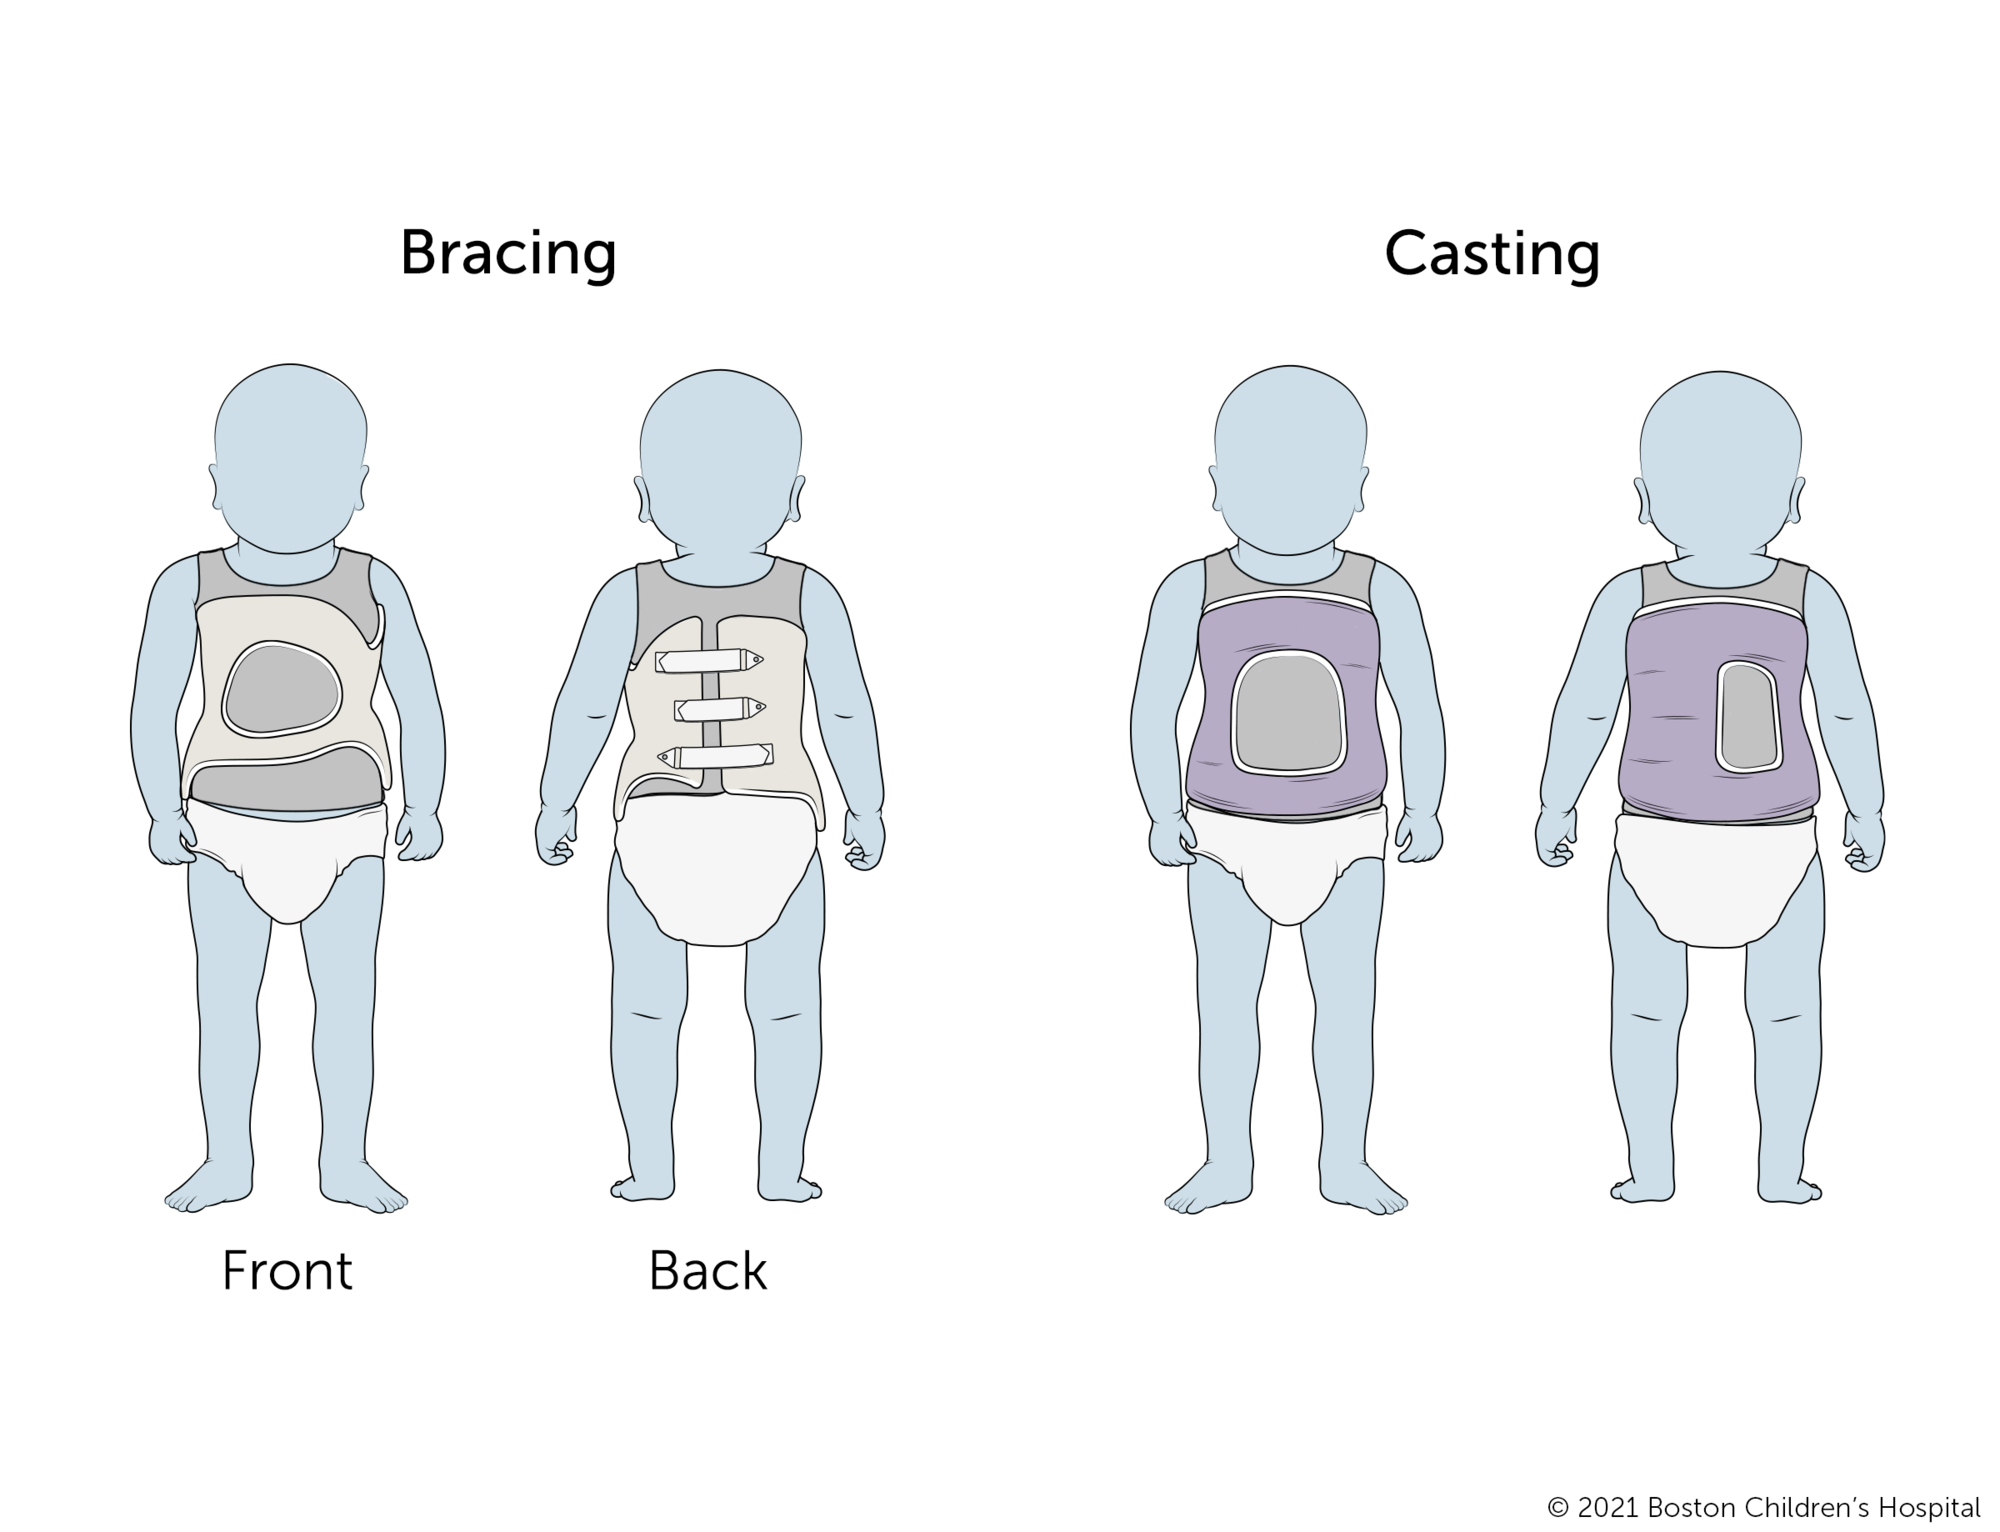 Braces for infantile scoliosis usually have a keyhole opening in the front and straps in the back. Casts for infantile scoliosis go all the way around the torso with keyhole openings in the front and back. 